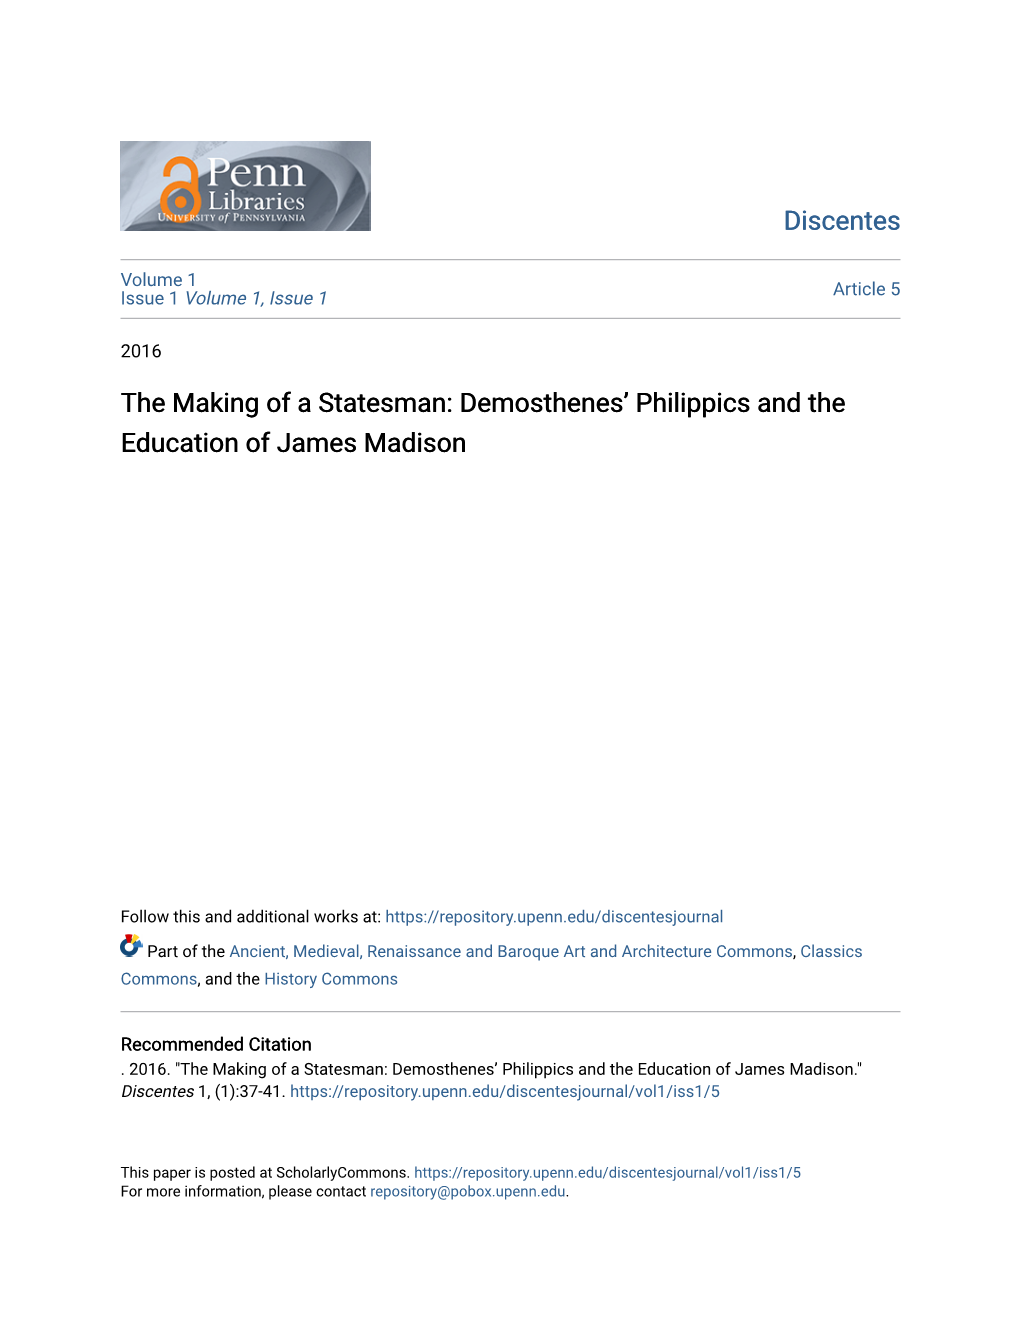 Demosthenes' Philippics and the Education of James Madison